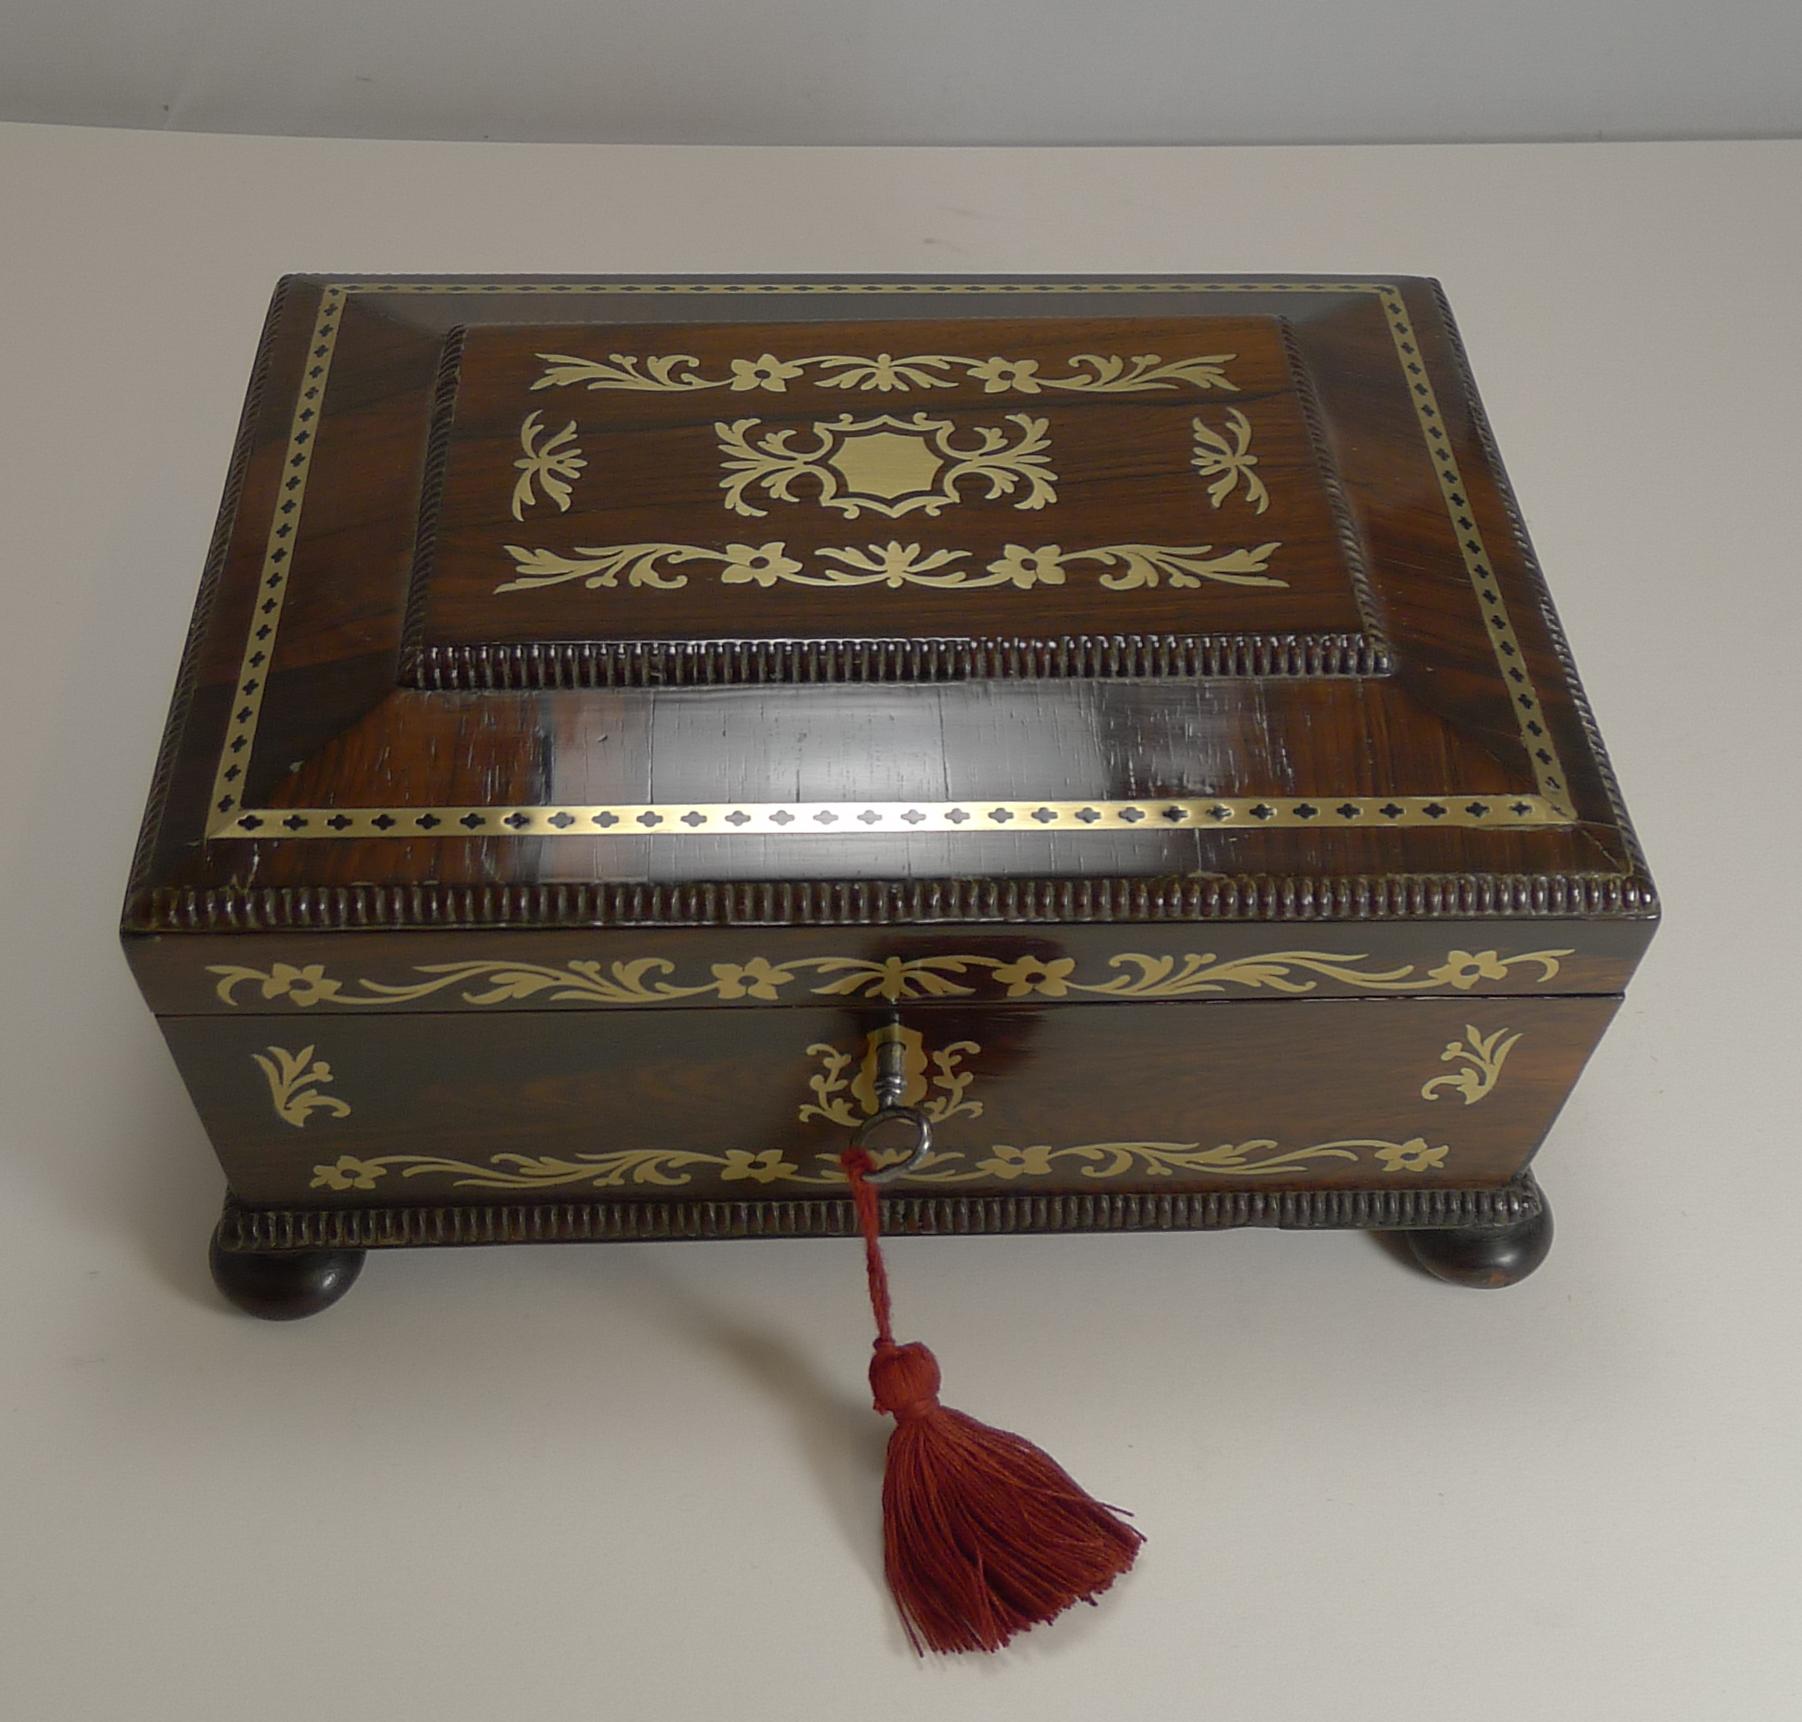 A truly elegant table / desk box, English in origin and from the Regency period dating to circa 1820.

Standing on four original bun feet, the box is veneered in exotic rosewood and the top and front is beautifully inlaid with cut brass